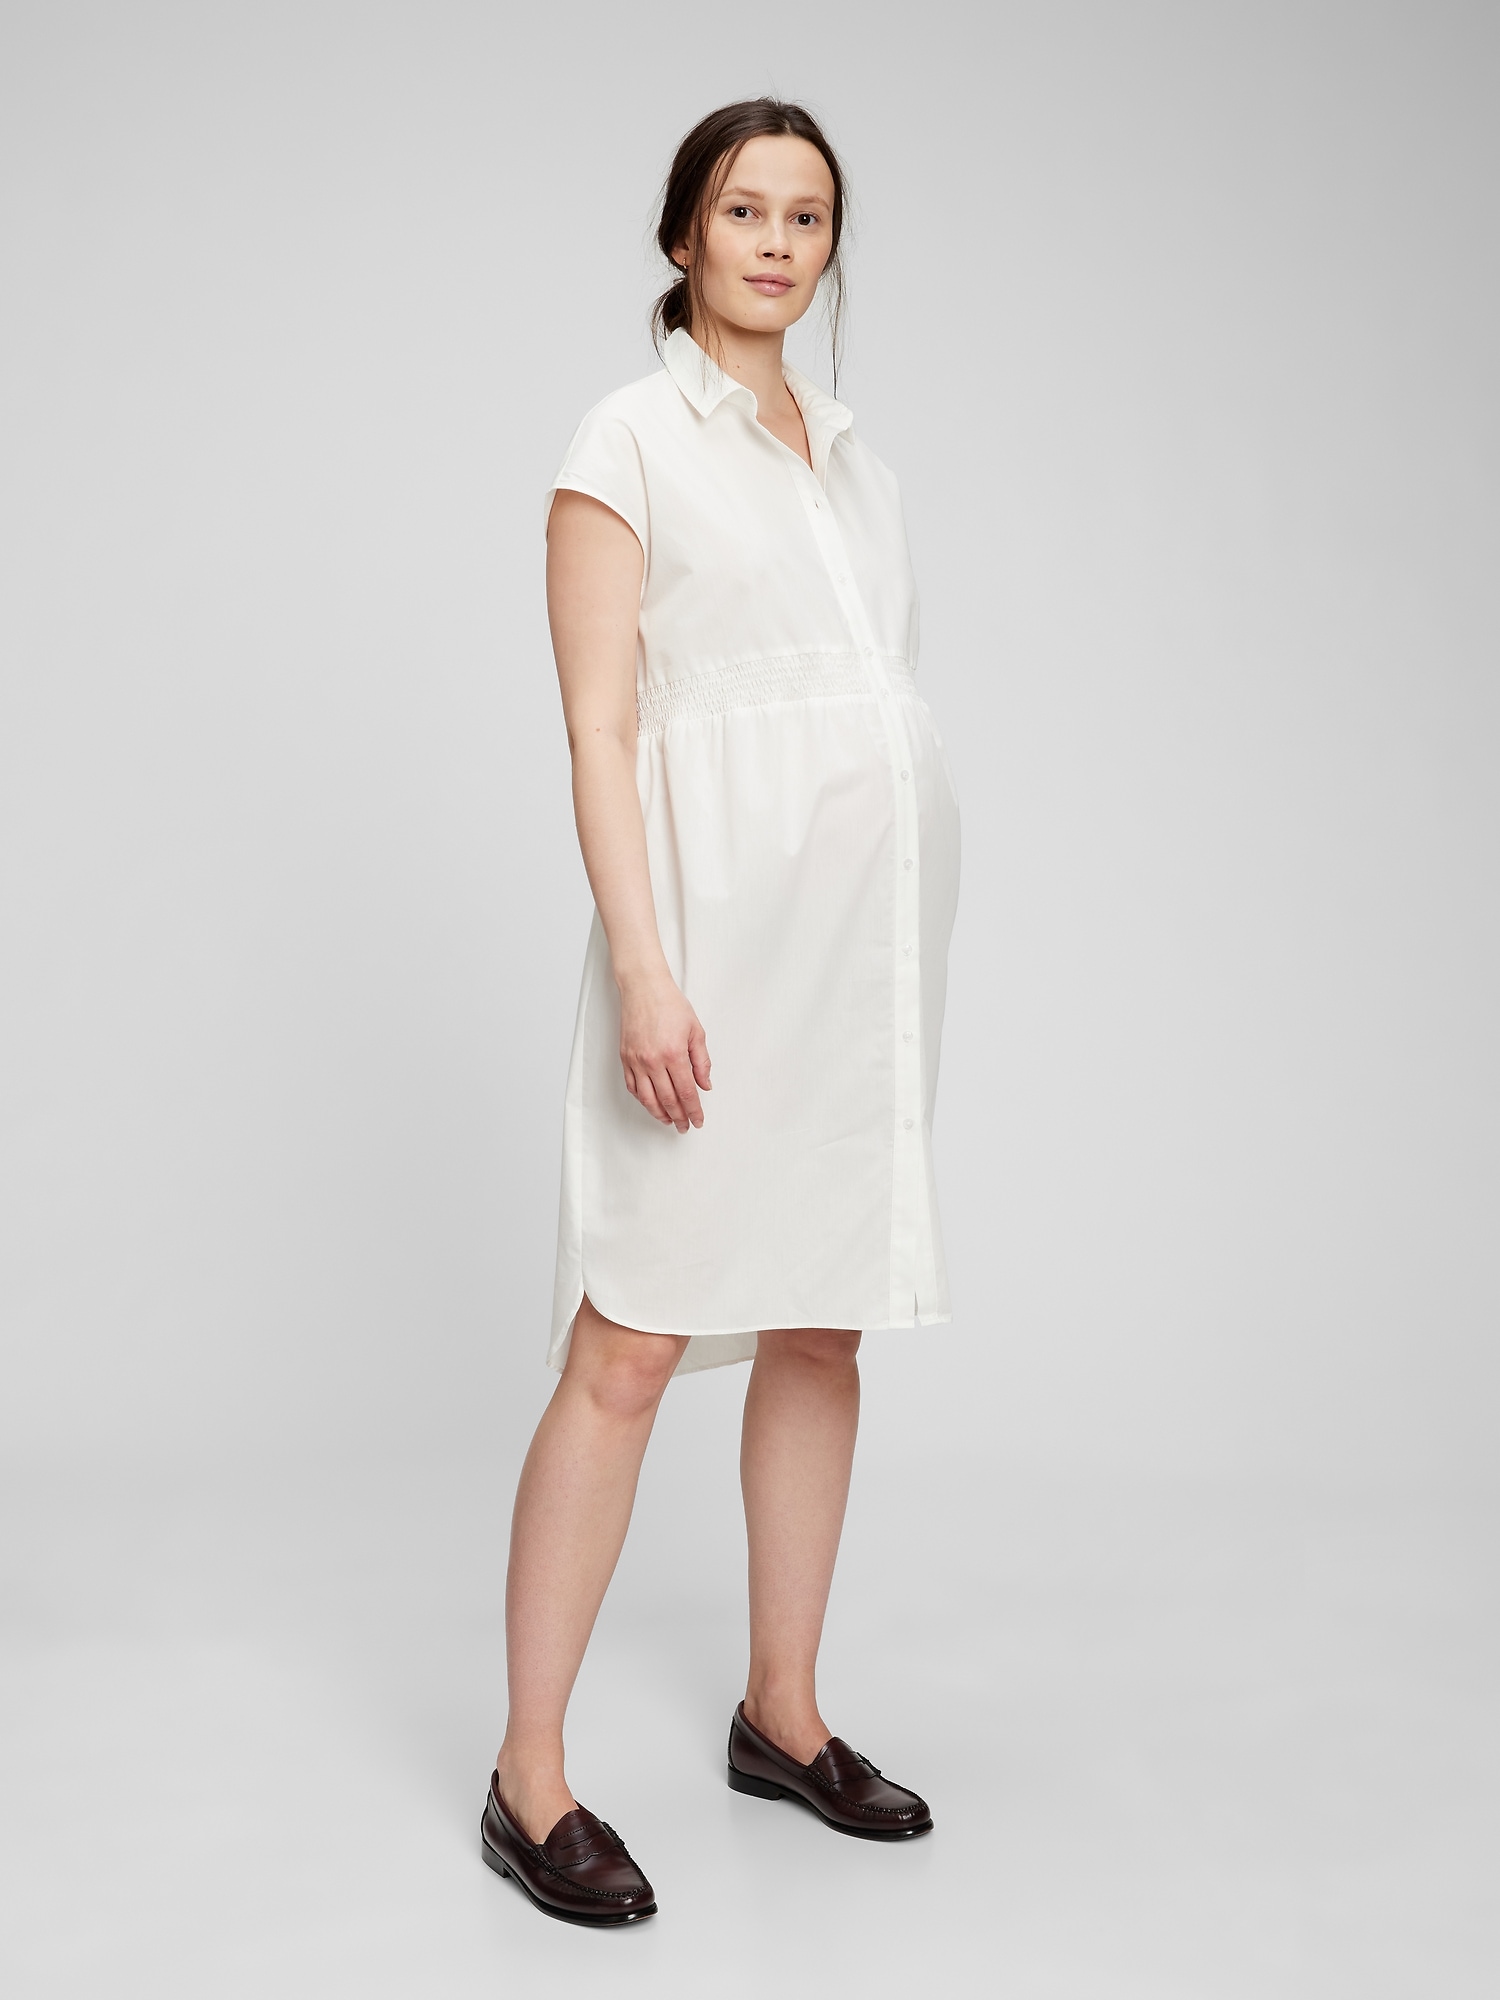 Inexpensive Maternity Dresses: Affordable and Stylish Options